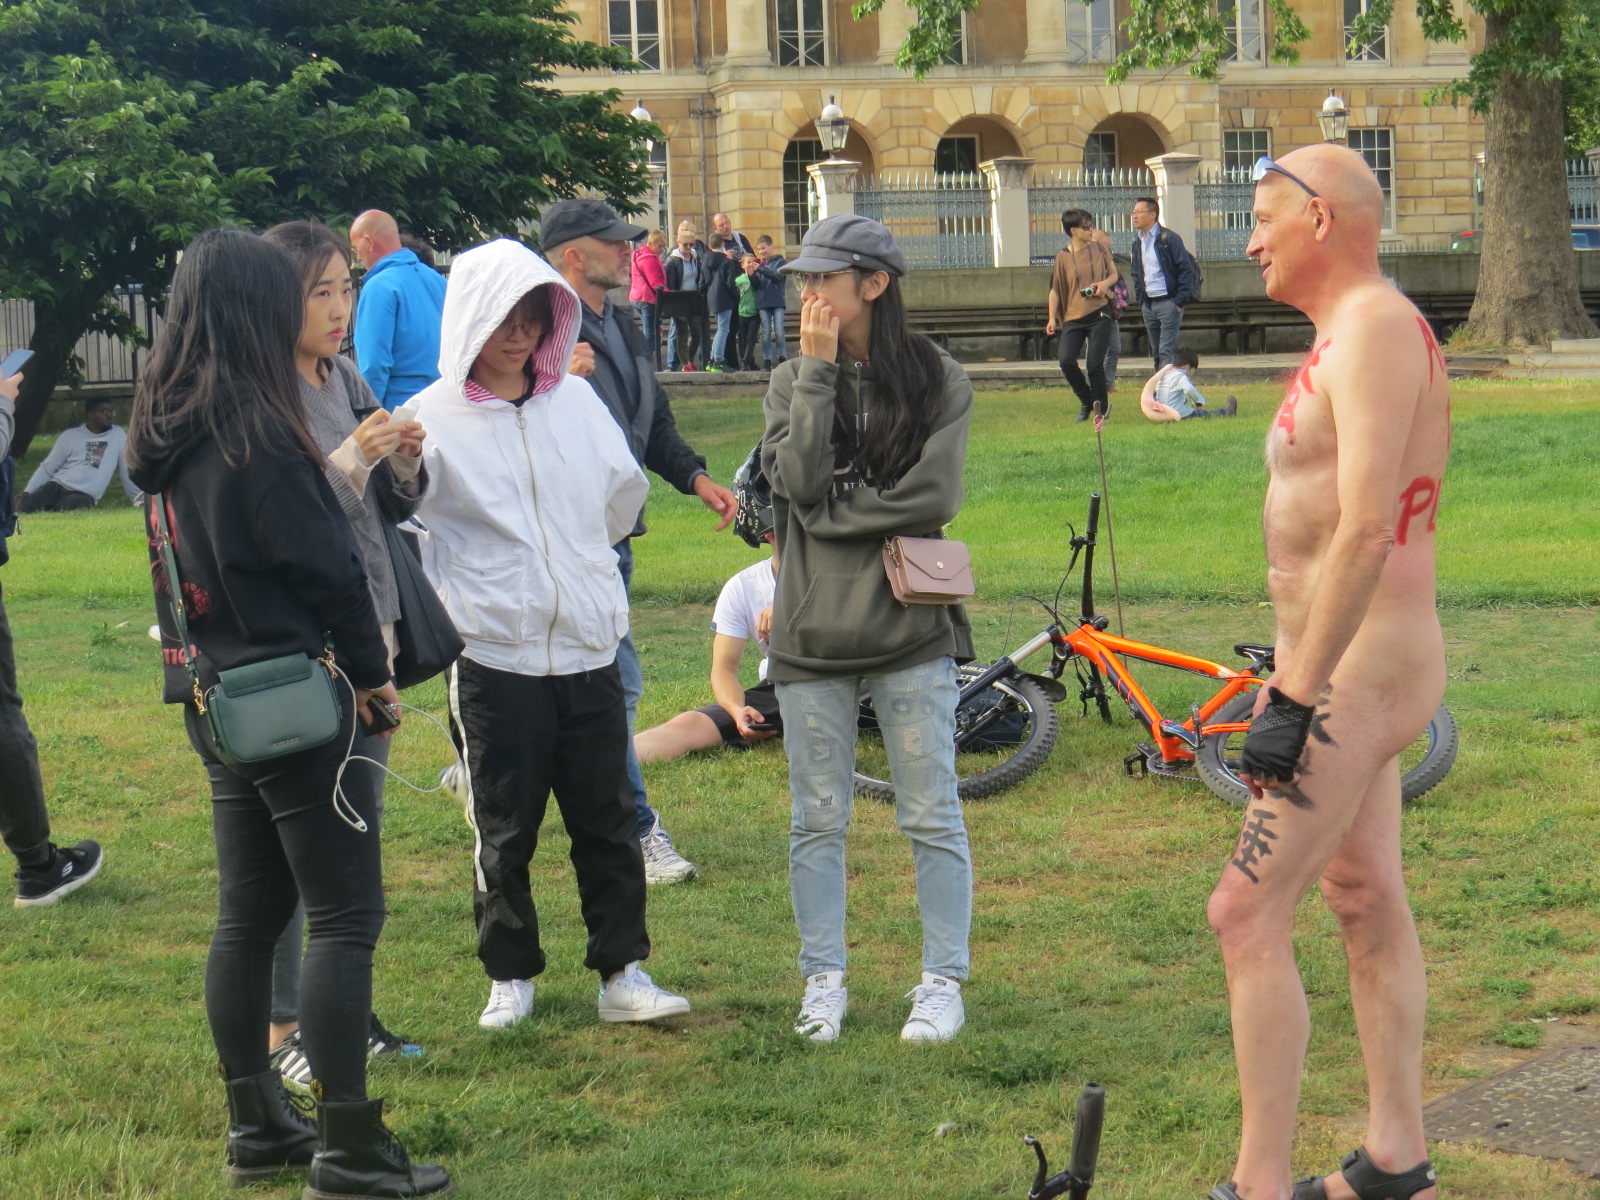 Asian girls inspecting a Nude Man in London Parade. 